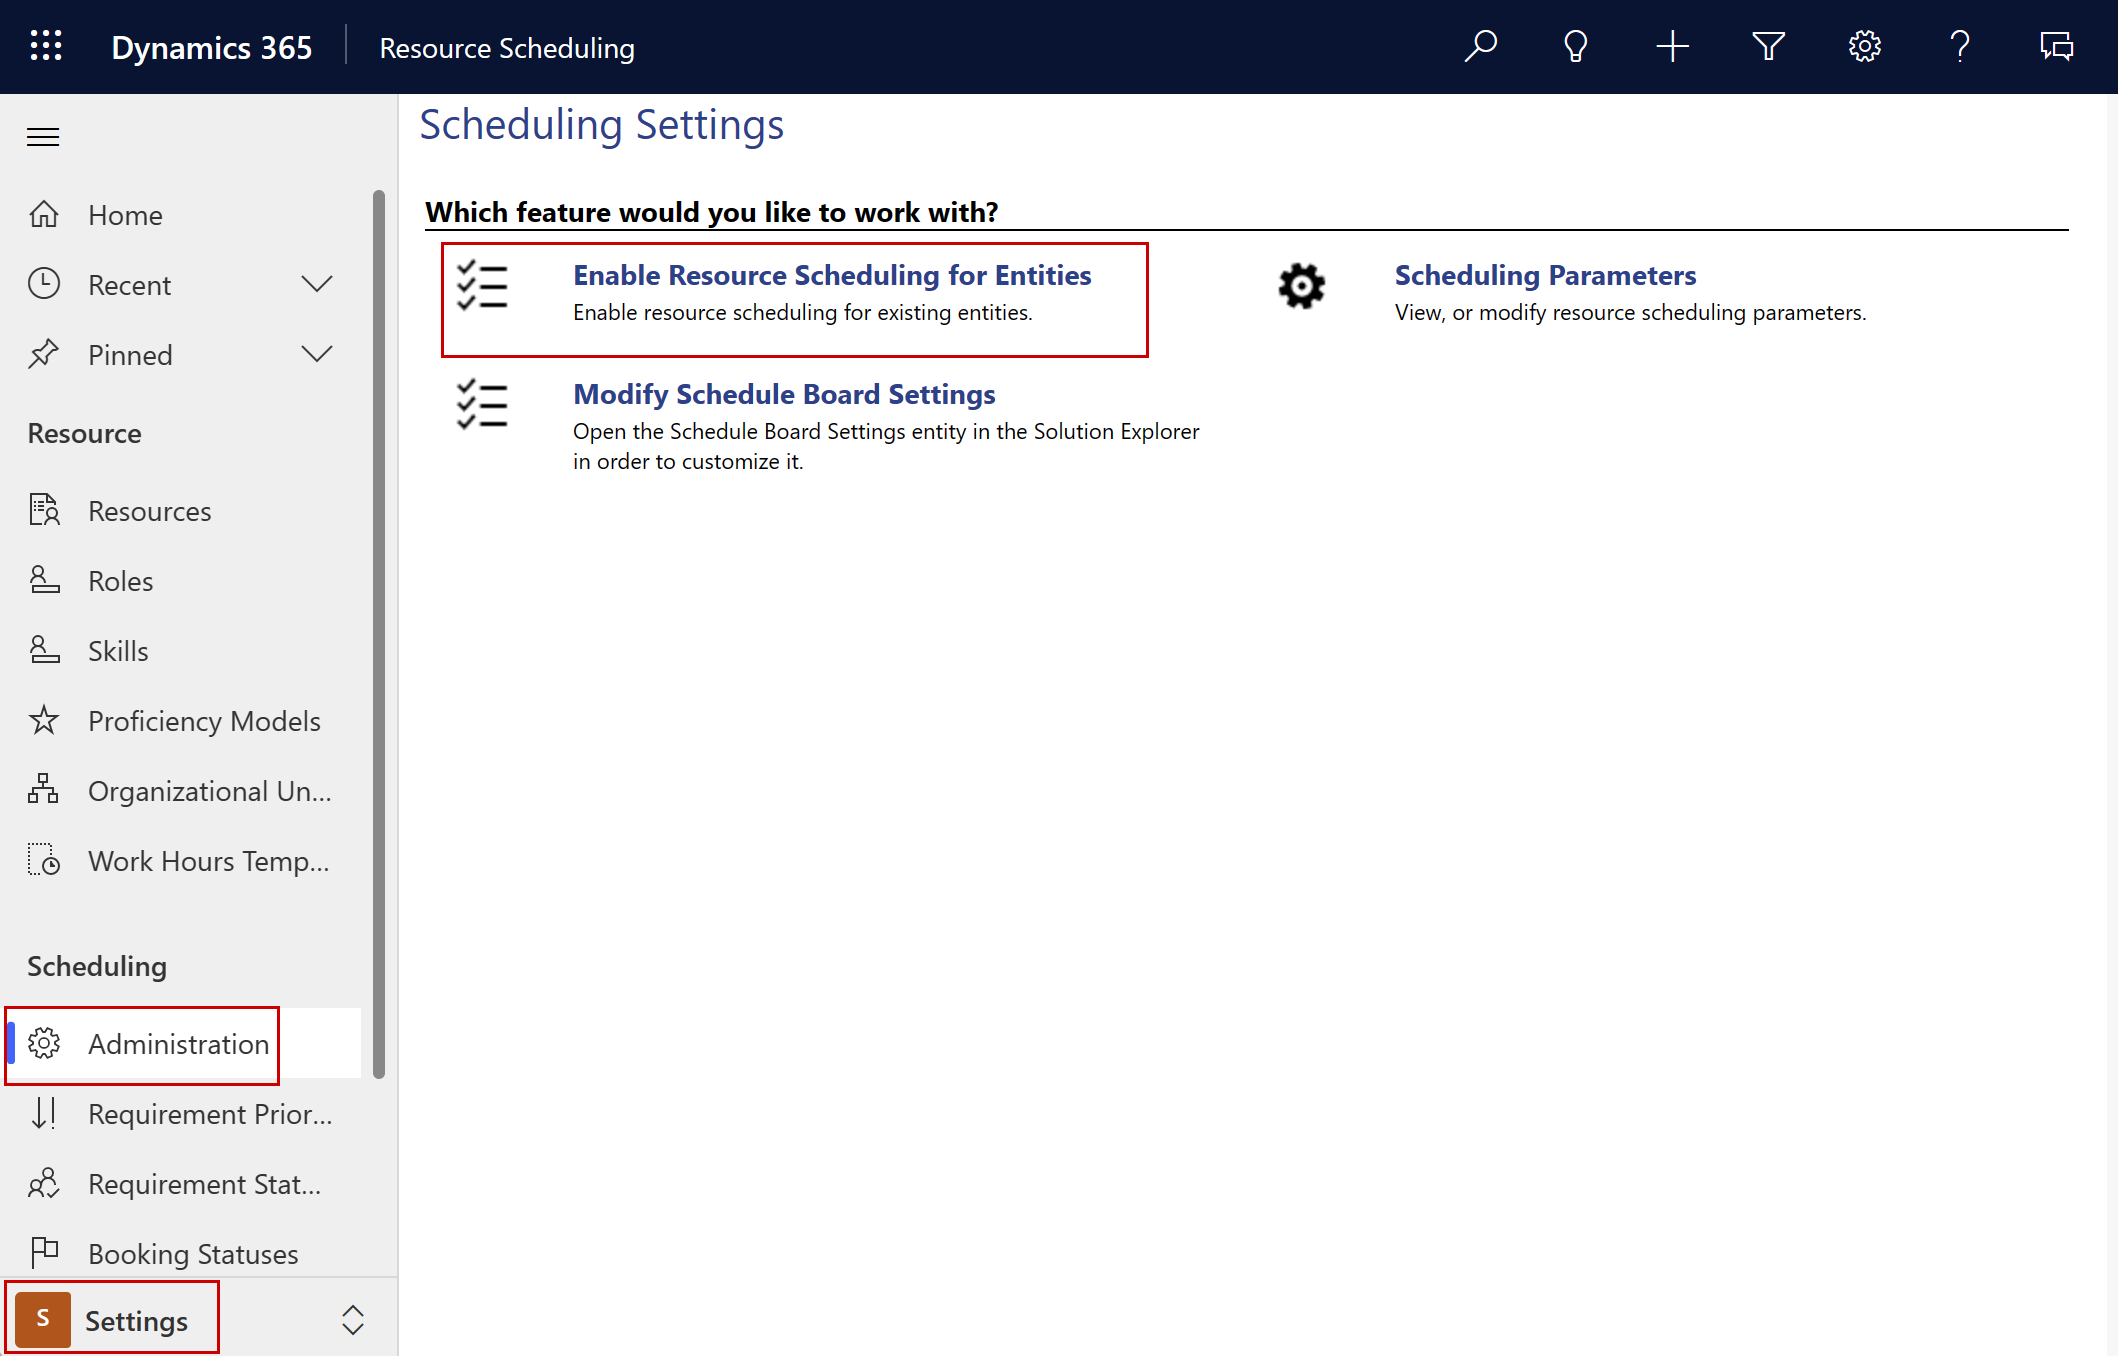 Screenshot of scheduling settings showing the "Enable Resource Scheduling for Entities" option